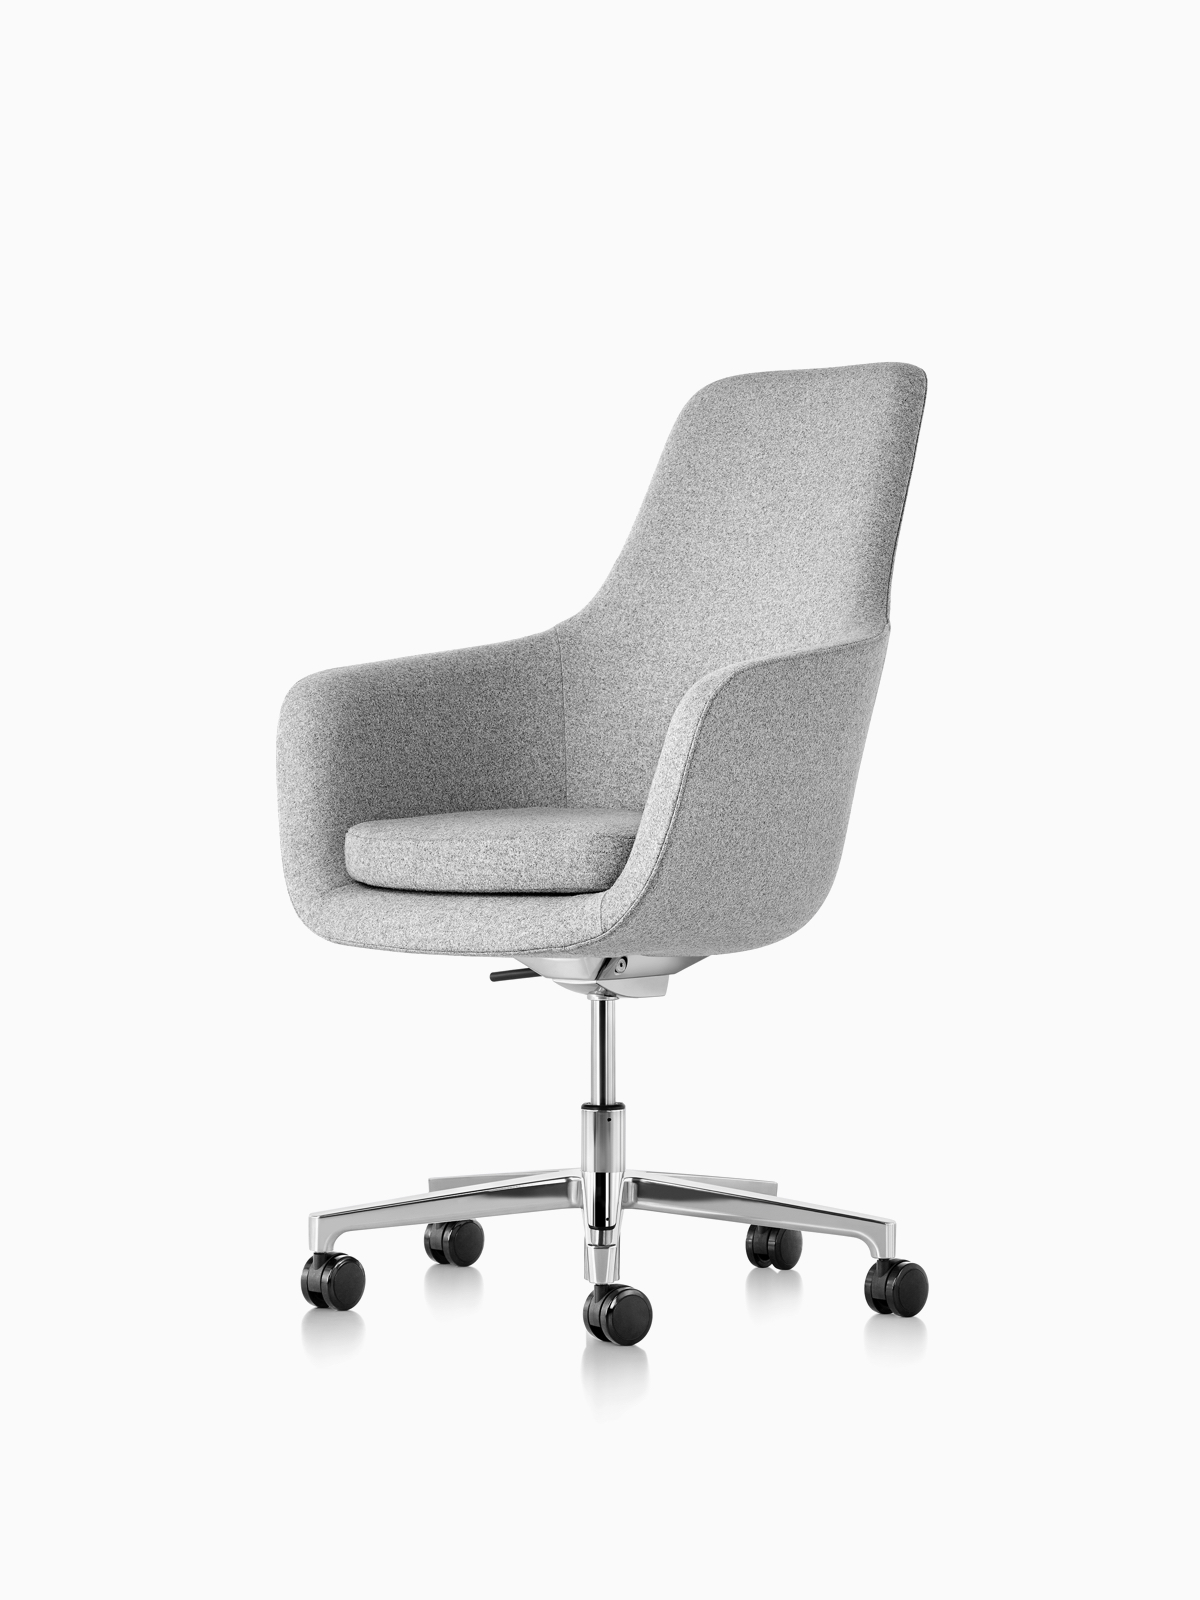 https://www.hermanmiller.com/content/dam/hmicom/page_assets/products/saiba_chair/th_prd_saiba_chair_office_chairs_hv.jpg